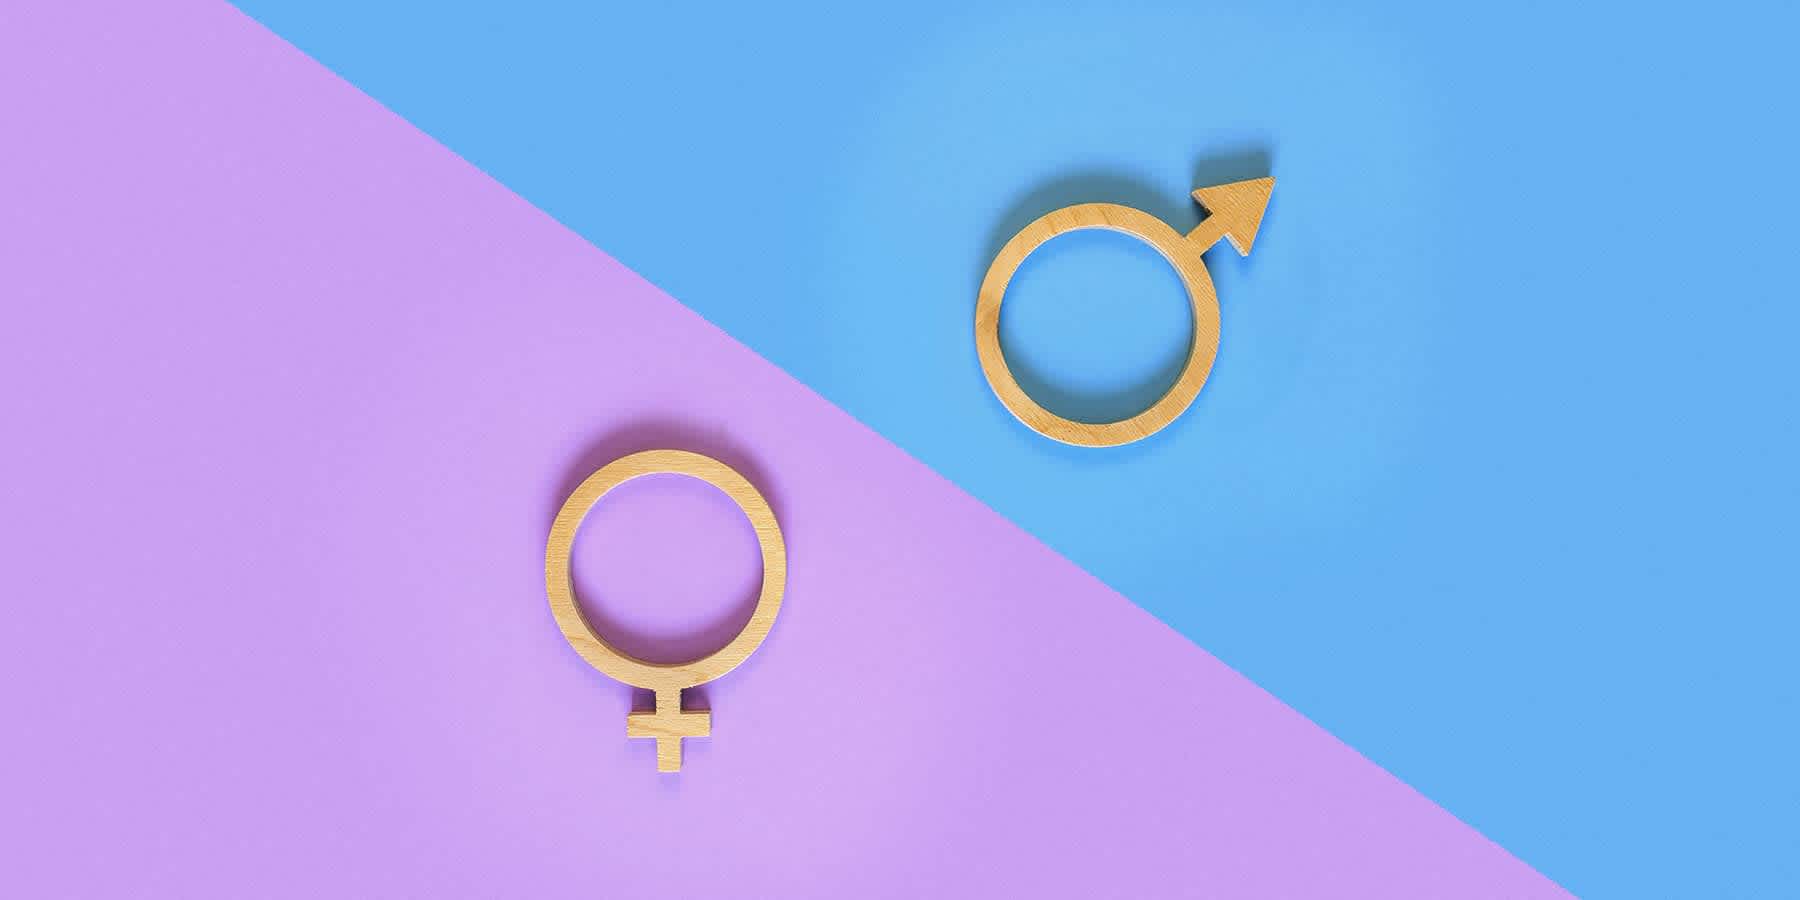 Female and male symbols against multicolored background to represent different types of STDs that can affect women and men